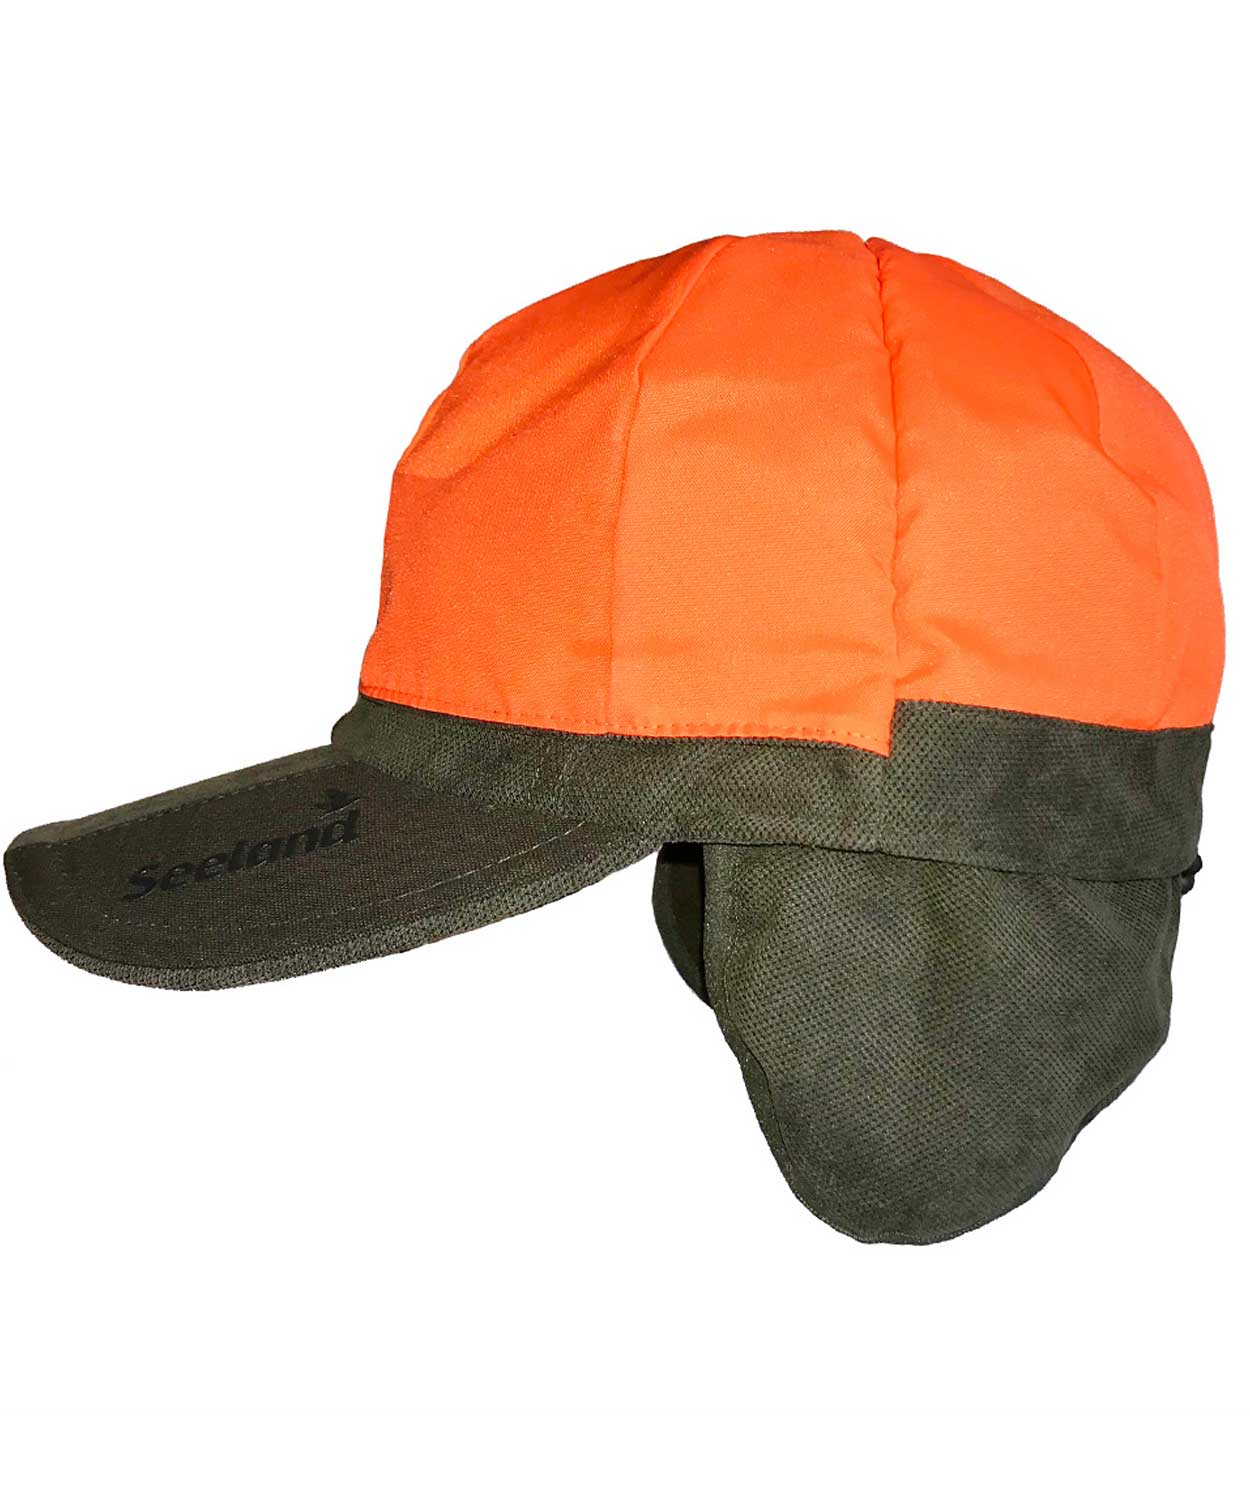 SEELAND Cap - Helt With Reversible Flourescent Crown - Grizzly Brown